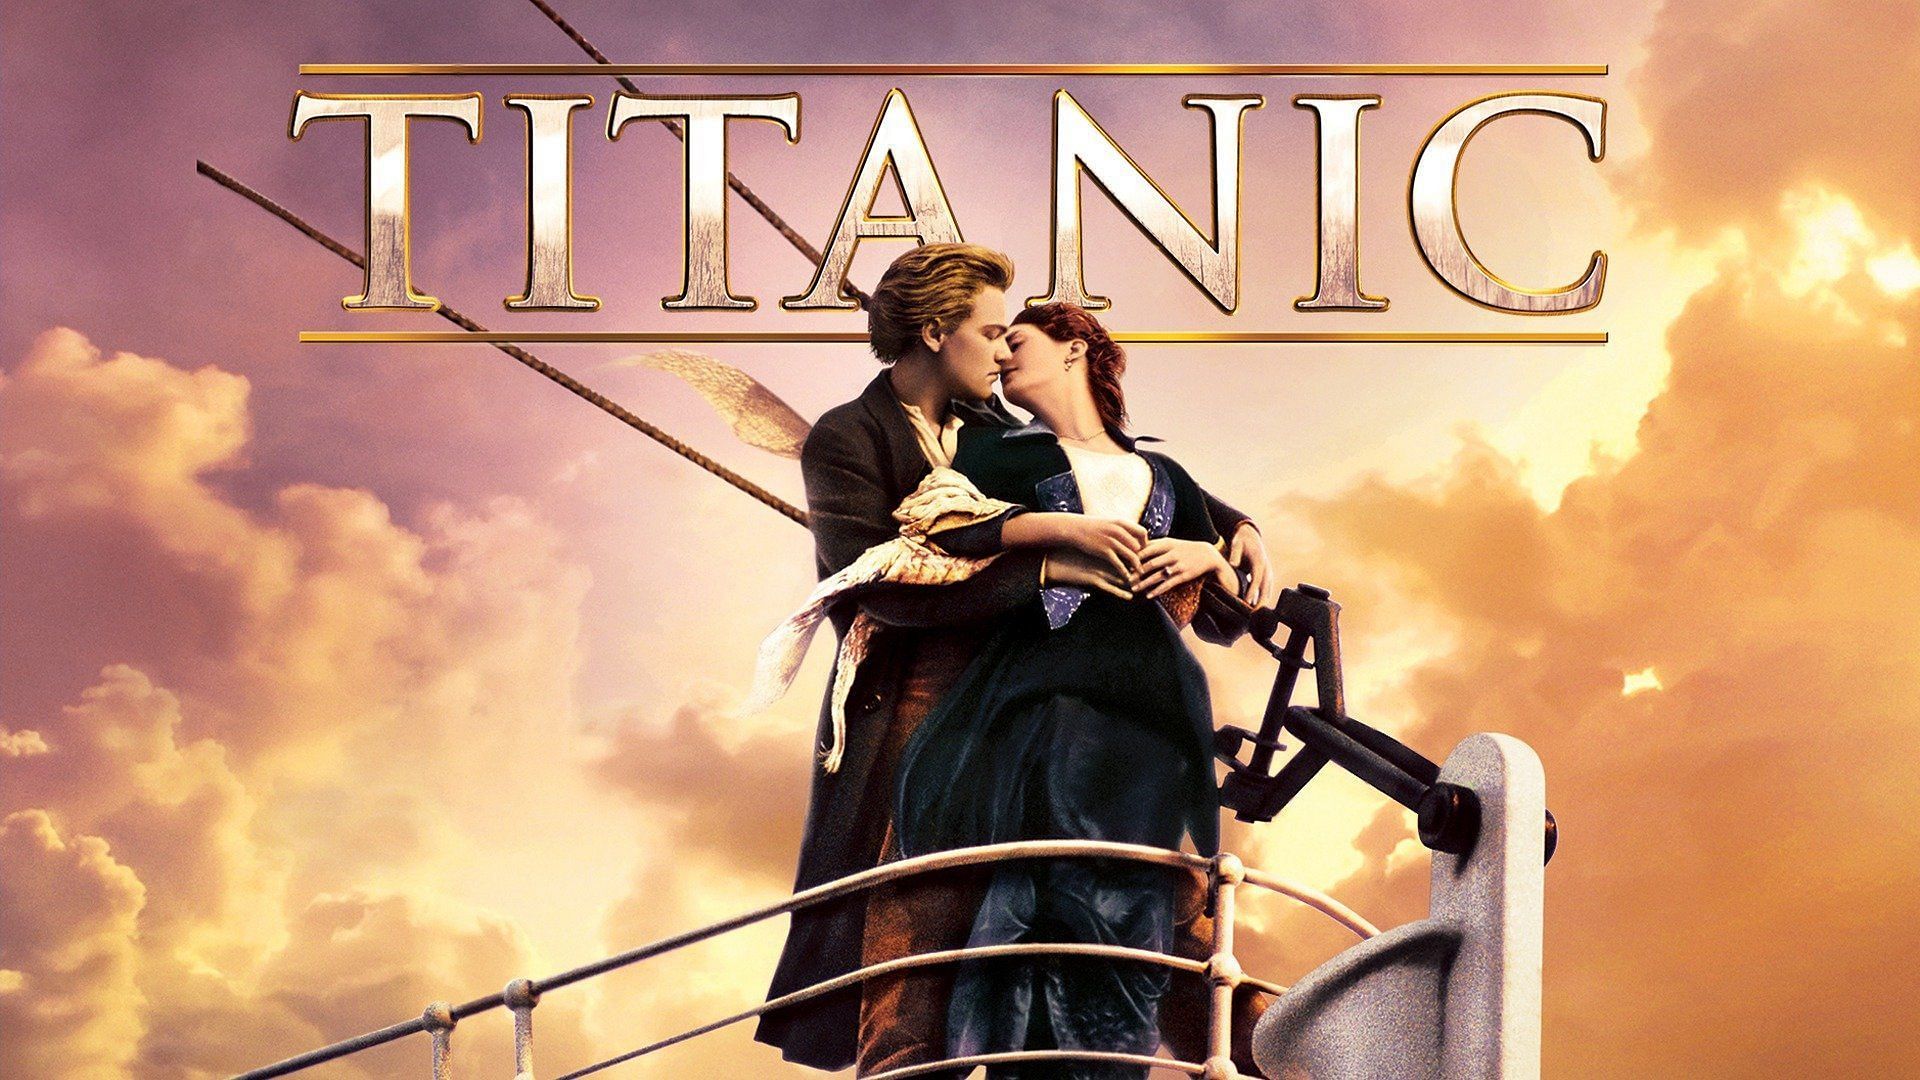 Titanic 25th Anniversary movie review: Is it worth another voyage?